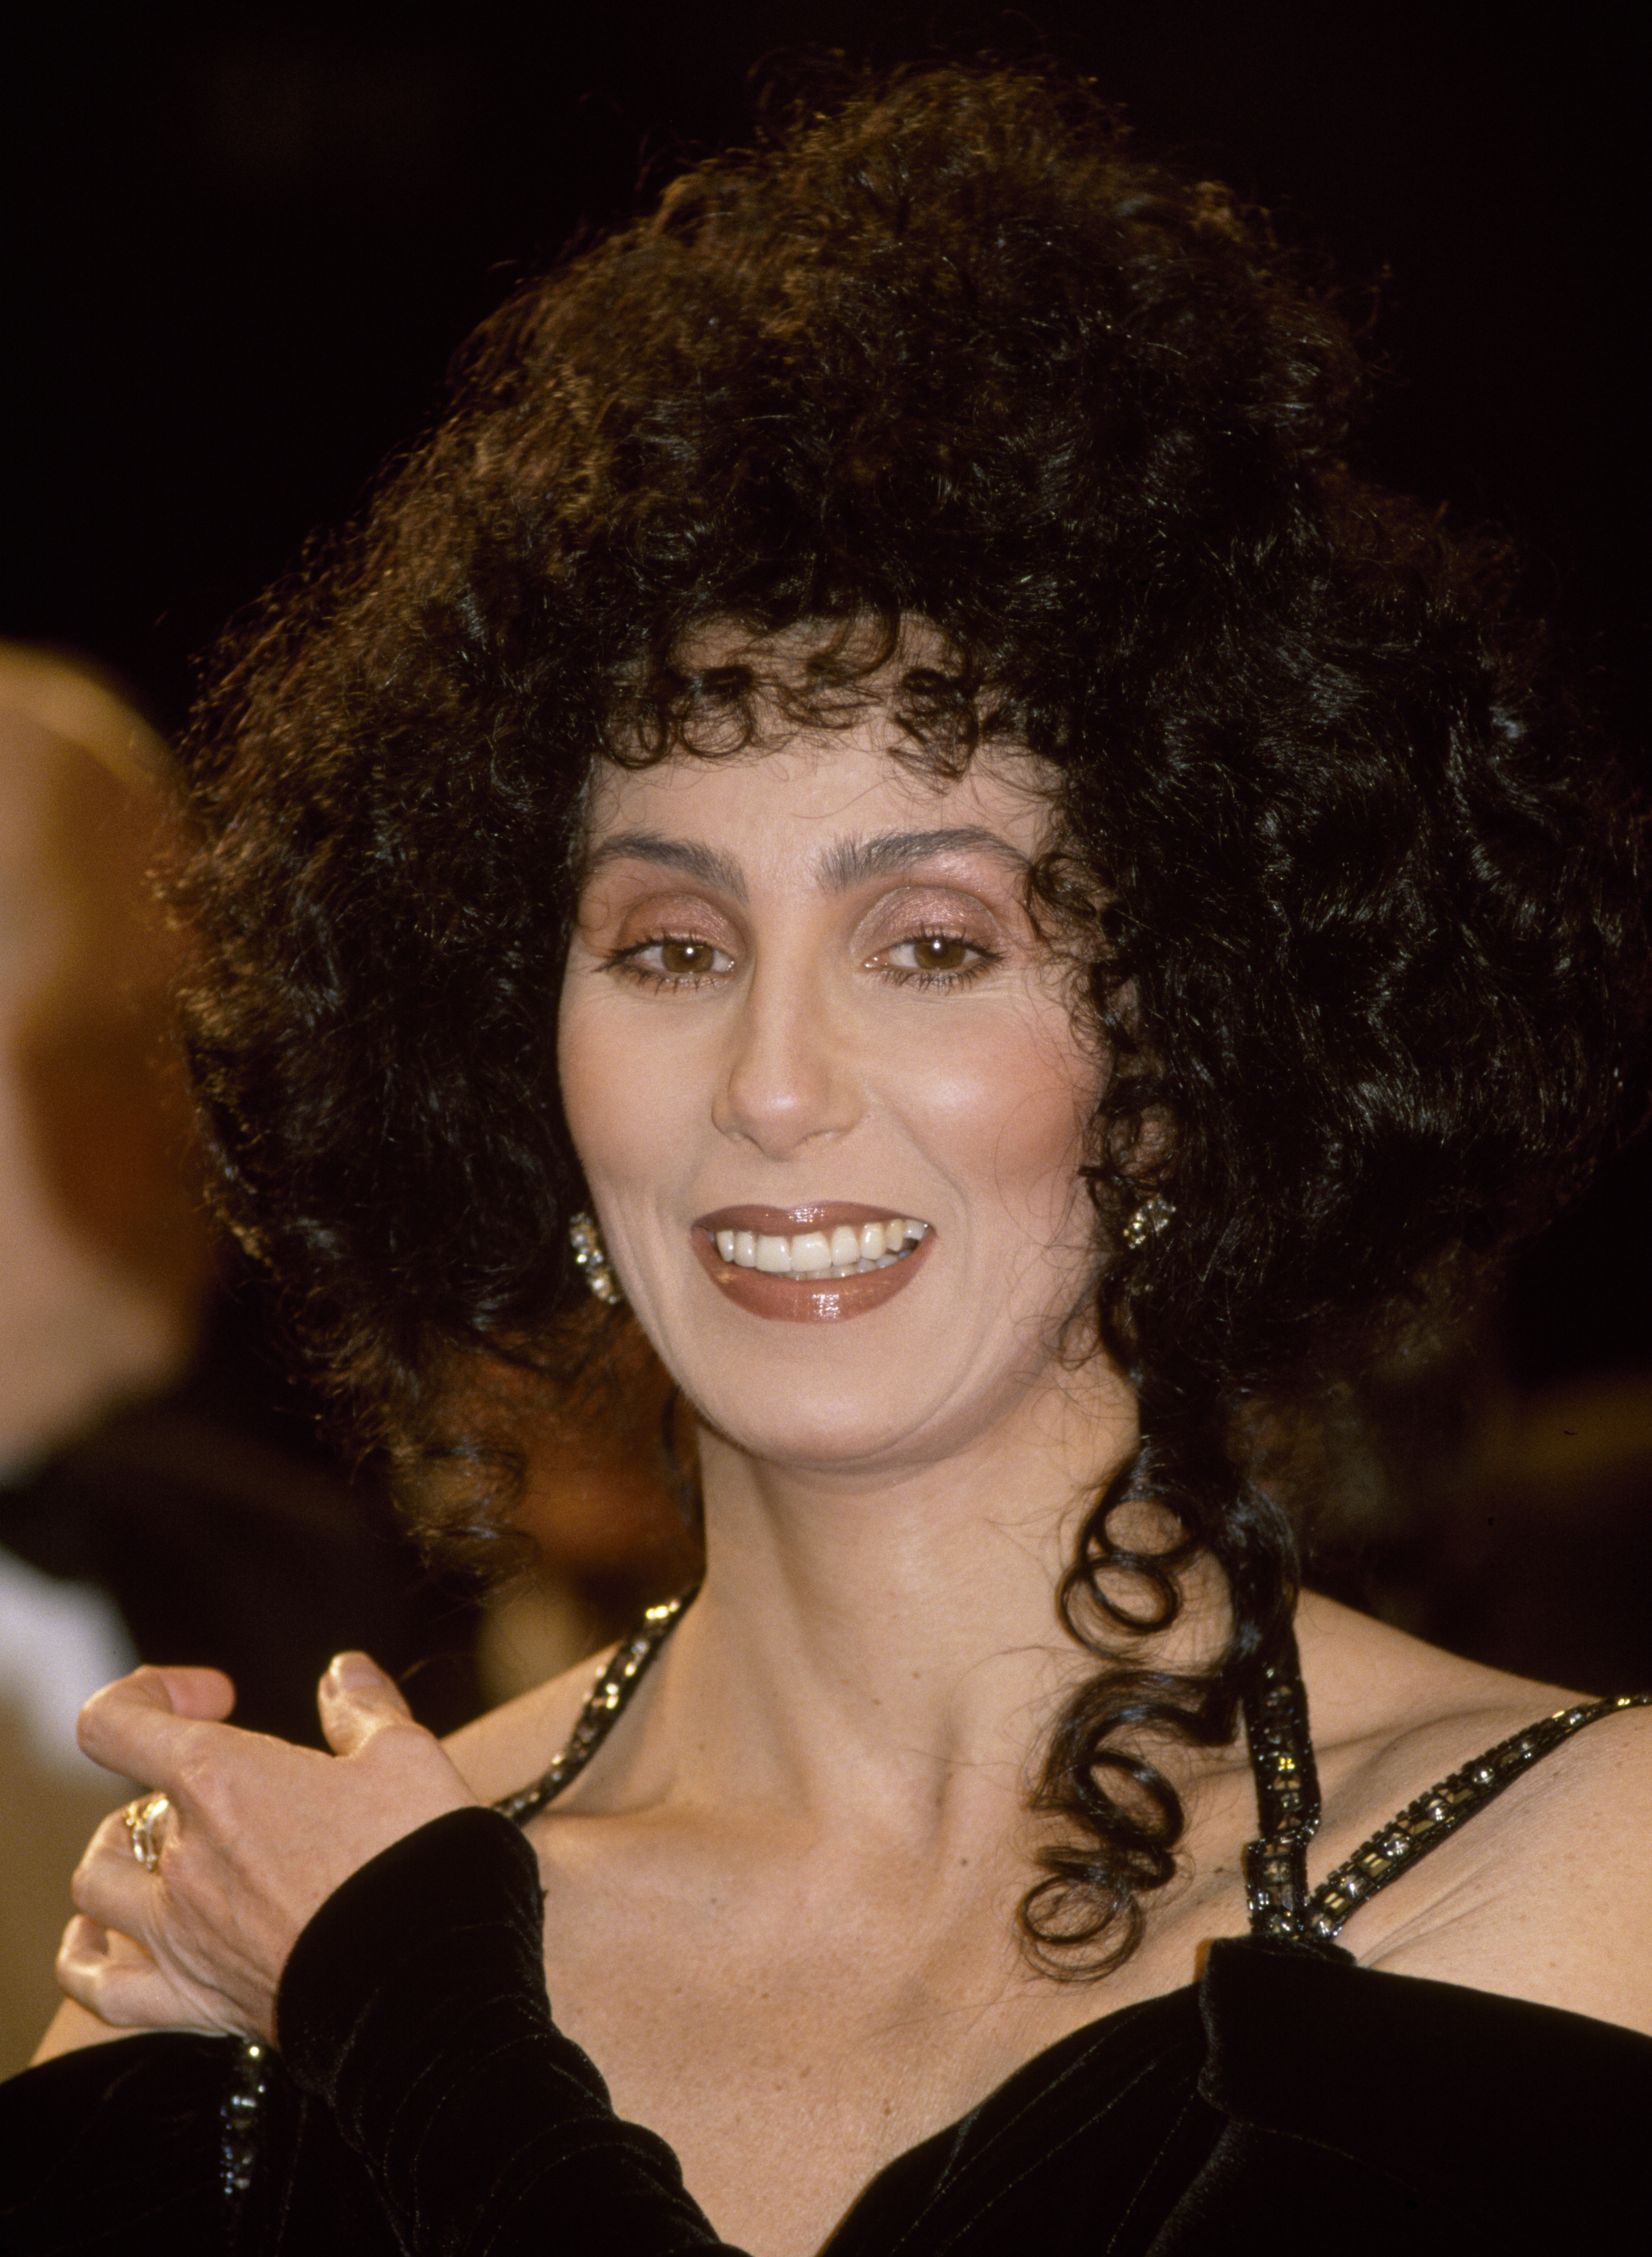 Cher pictured at the film premiere of "Empire of the Sun" on March 1, 1988 in London | Source: Getty Images